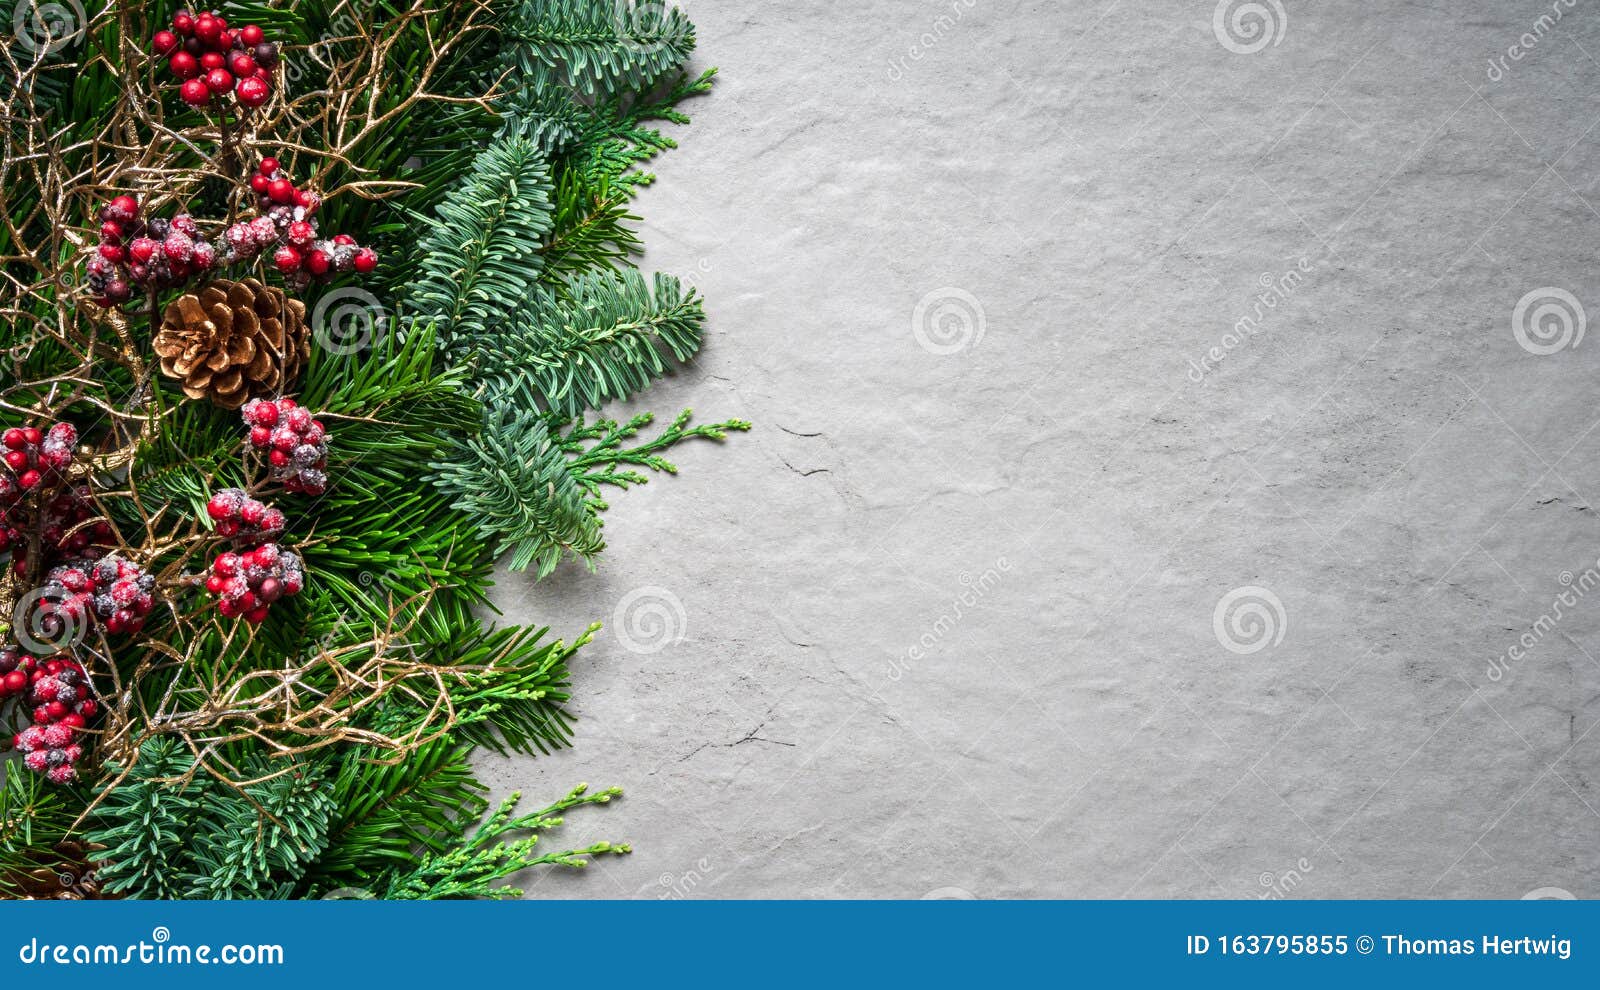 fir ranches with christmas berries on grey stone background